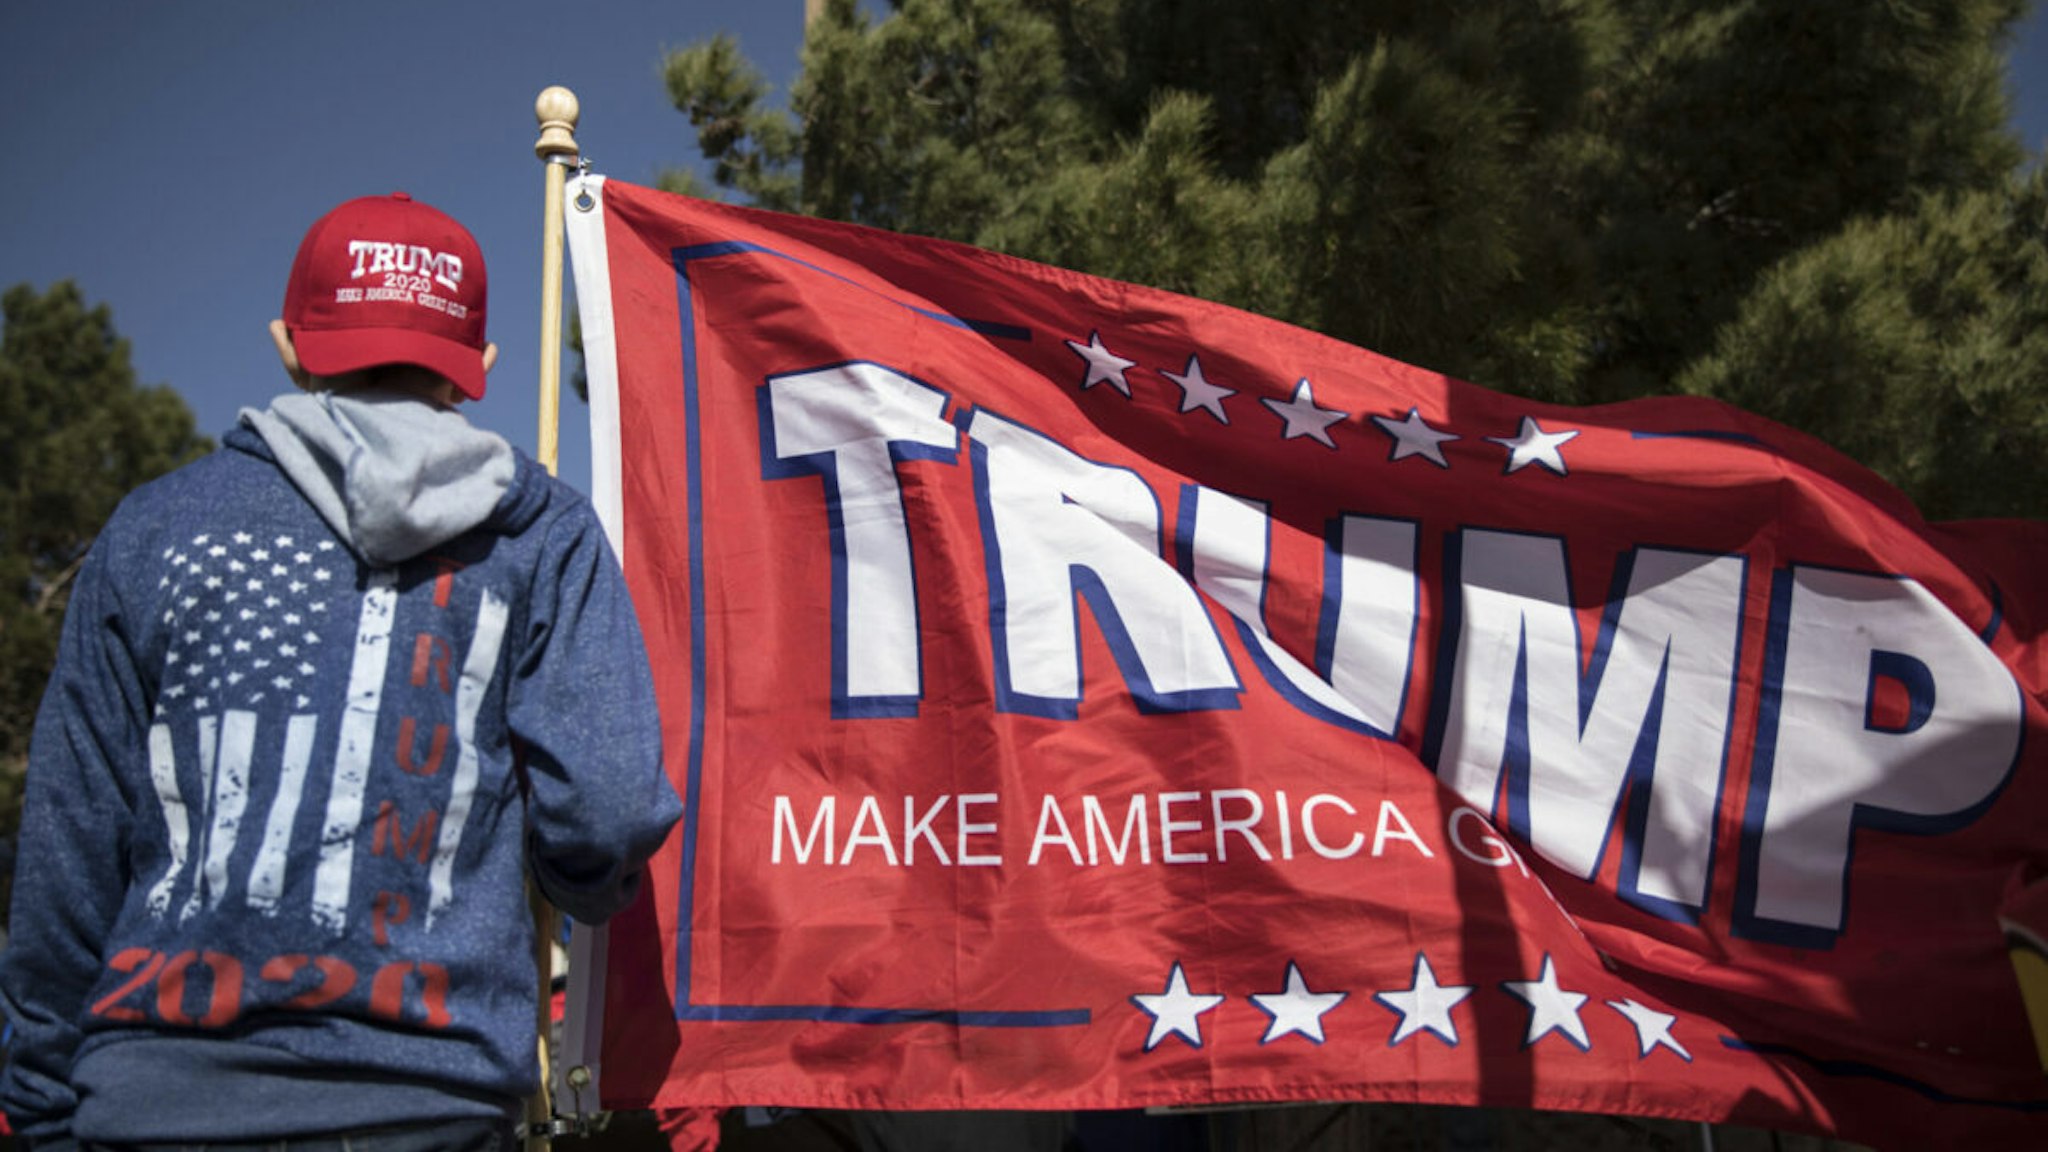 A boy holds a Trump flag at a rally for U.S. President Donald Trump in El Paso, Texas, U.S., on Monday, Feb. 11, 2019. Trump and prospective Democratic challenger Beto O'Rourke took part in dueling rallies in Texas on Monday, with each using the president's proposed border wall as an early proxy for the 2020 election